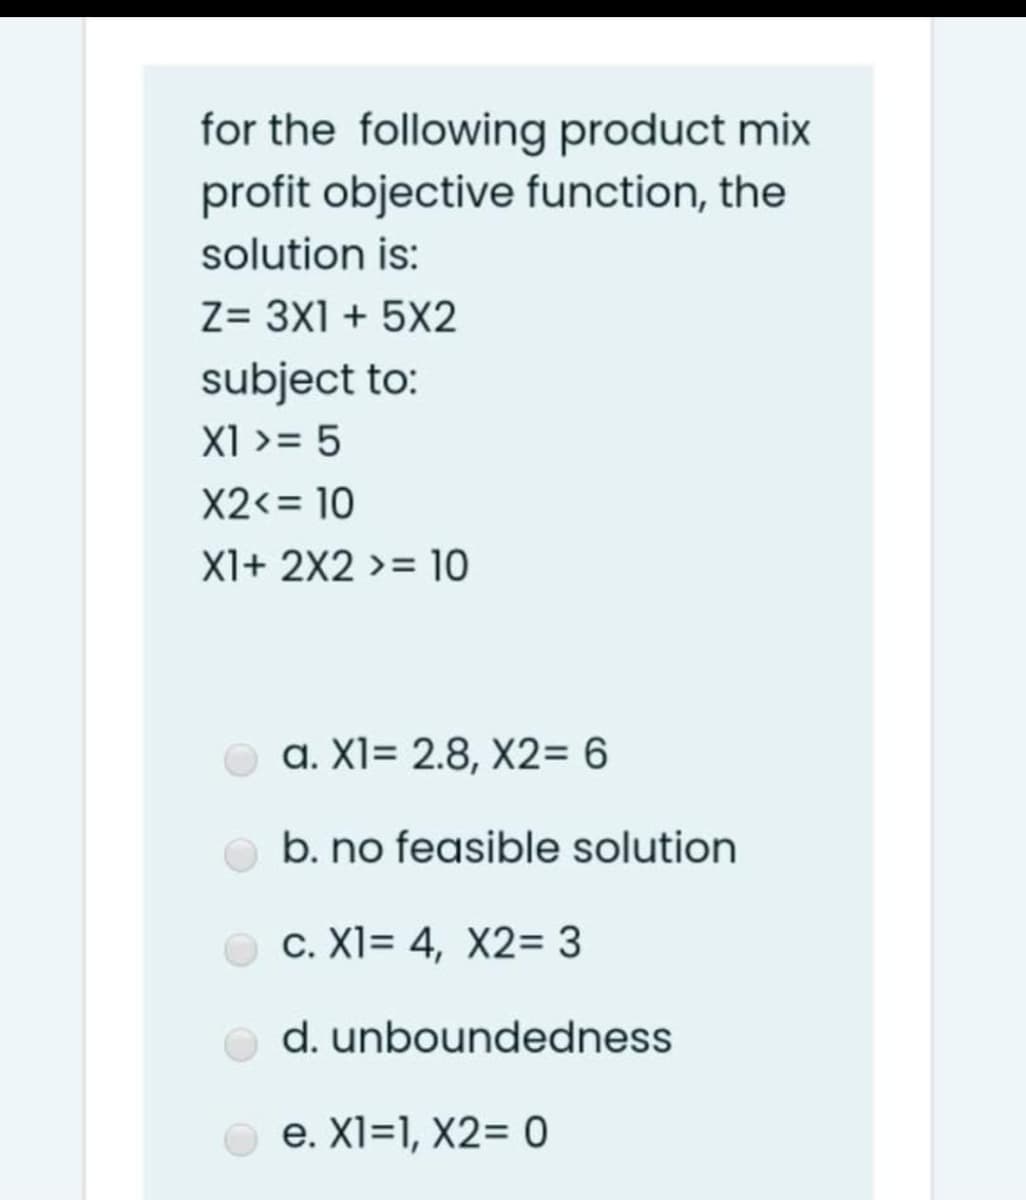 for the following product mix
profit objective function, the
solution is:
Z= 3X1 + 5X2
subject to:
X1 >= 5
X2<= 10
X1+ 2X2 >= 10
a. XI= 2.8, X2= 6
b. no feasible solution
c. XI= 4, X2= 3
d. unboundedness
e. XI=1, X2= 0
